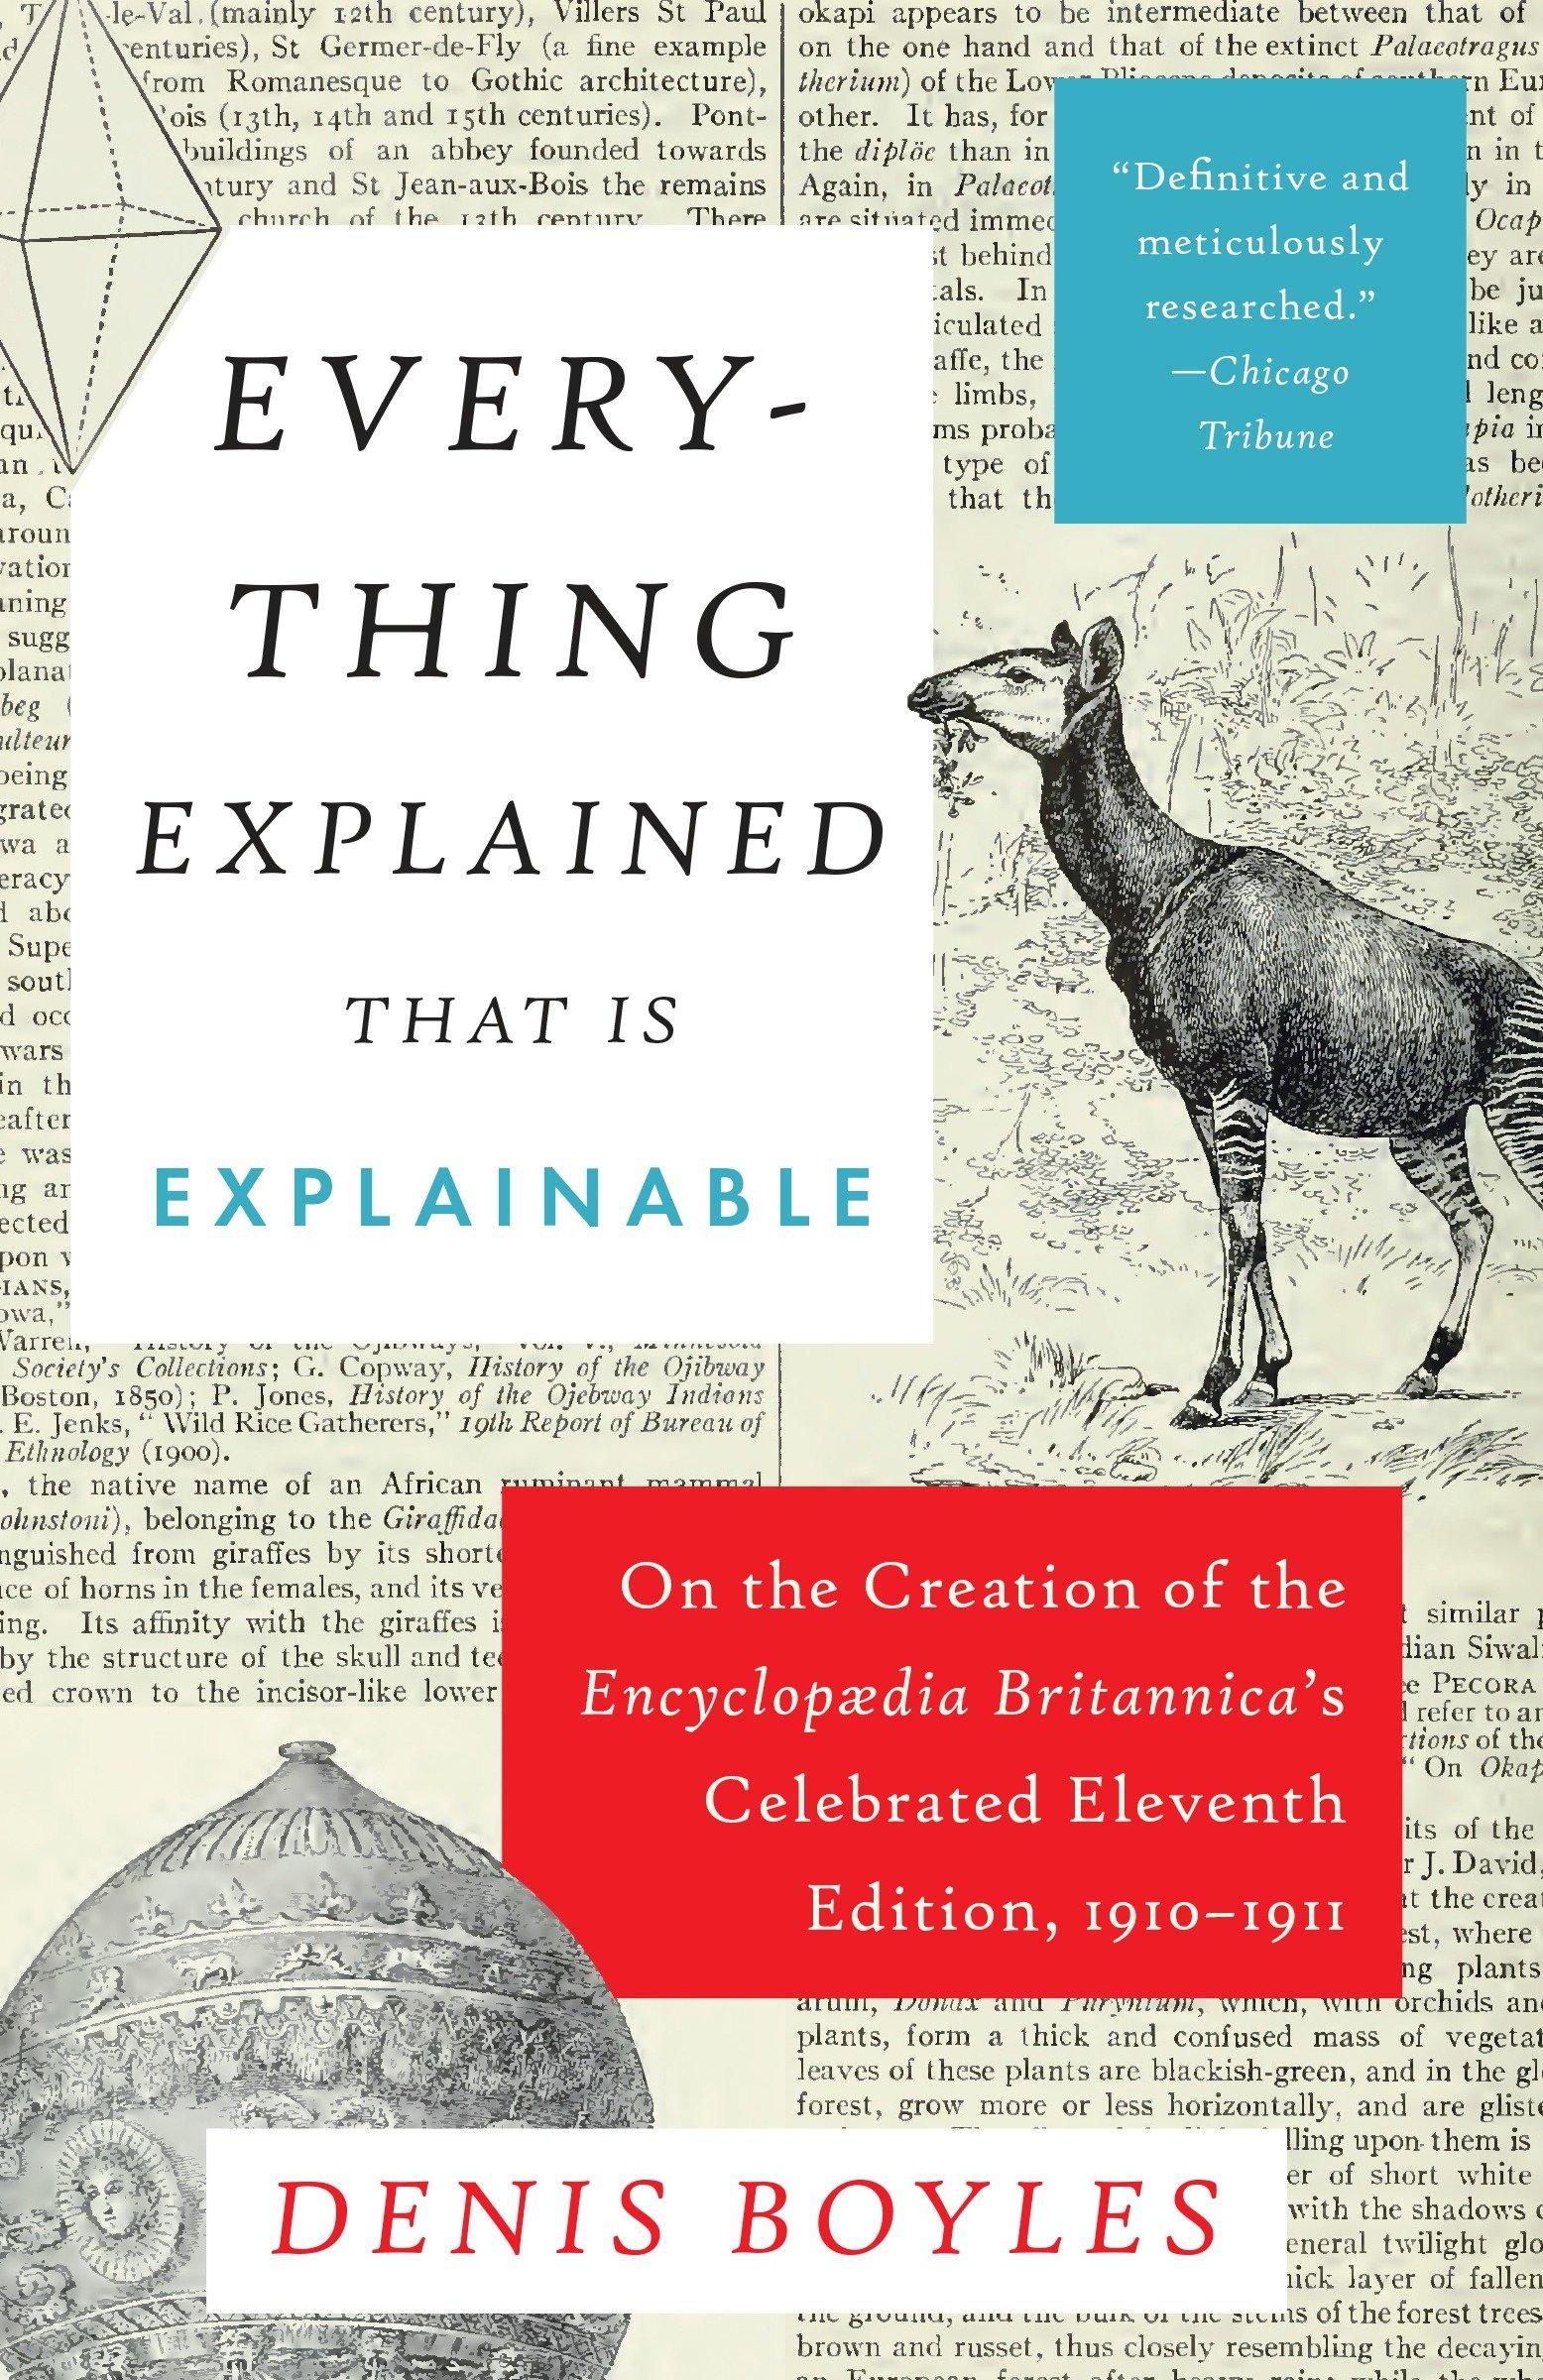 Everything Explained That Is Explainable: On the Creation of the Encyclopaedia Britannica's Celebrated Eleventh Edition, 1910-1911 / Denis Boyles / Taschenbuch / Einband - flex.(Paperback) / Englisch - Boyles, Denis